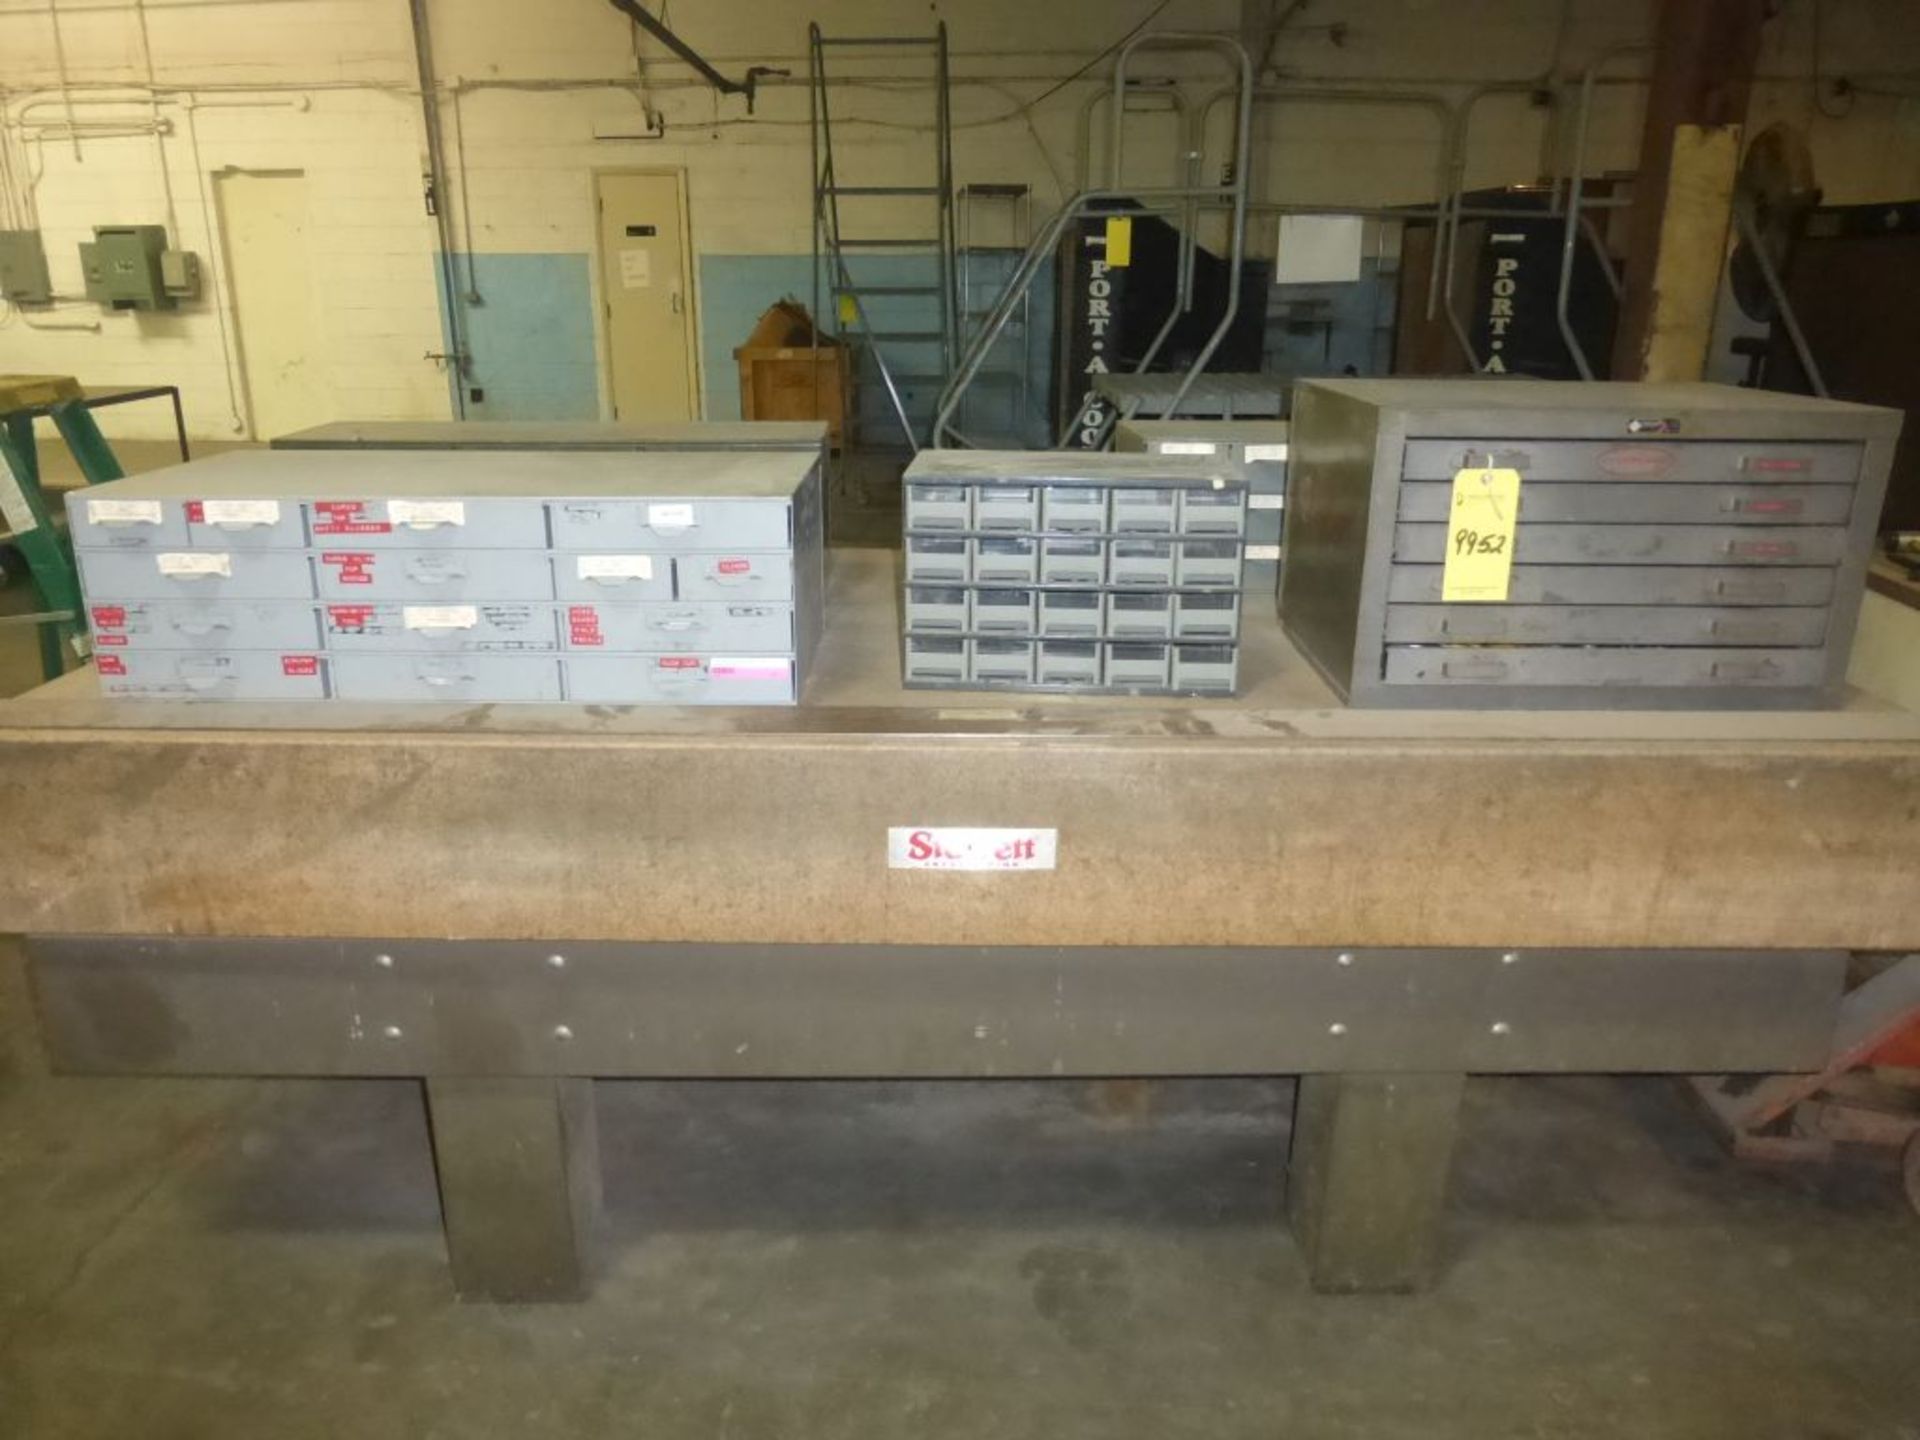 Granite Surface Plate and Parts Cabinets | Tag: 229952 | Alternate Location: Hillside A